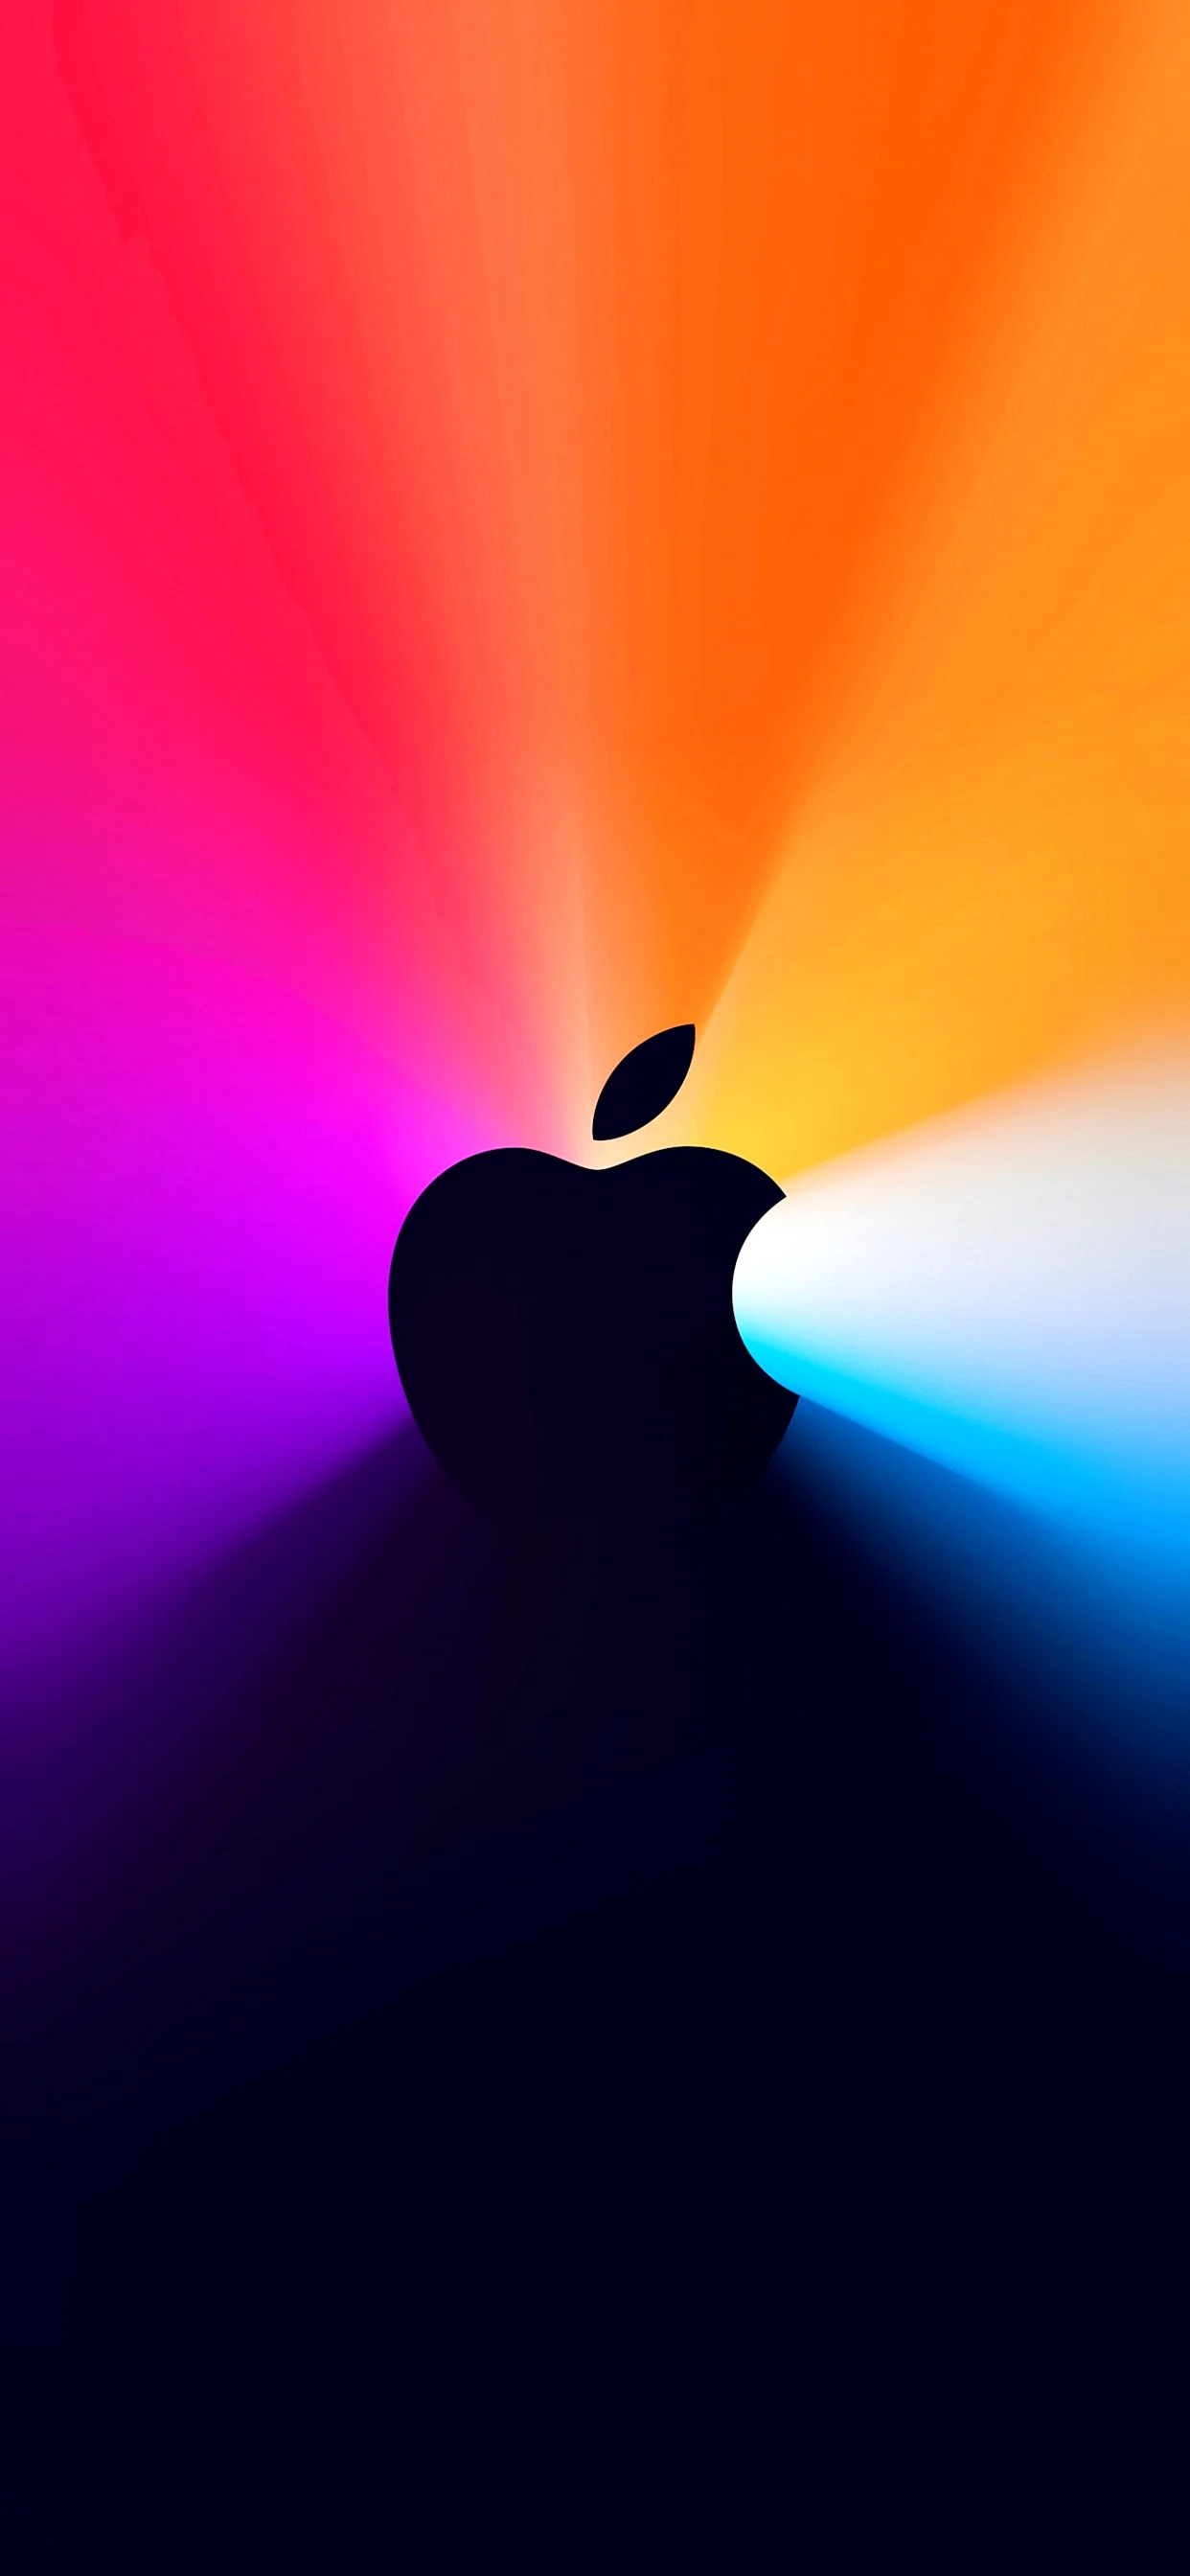 Apple Wallpaper for iPhone 11 Pro Max